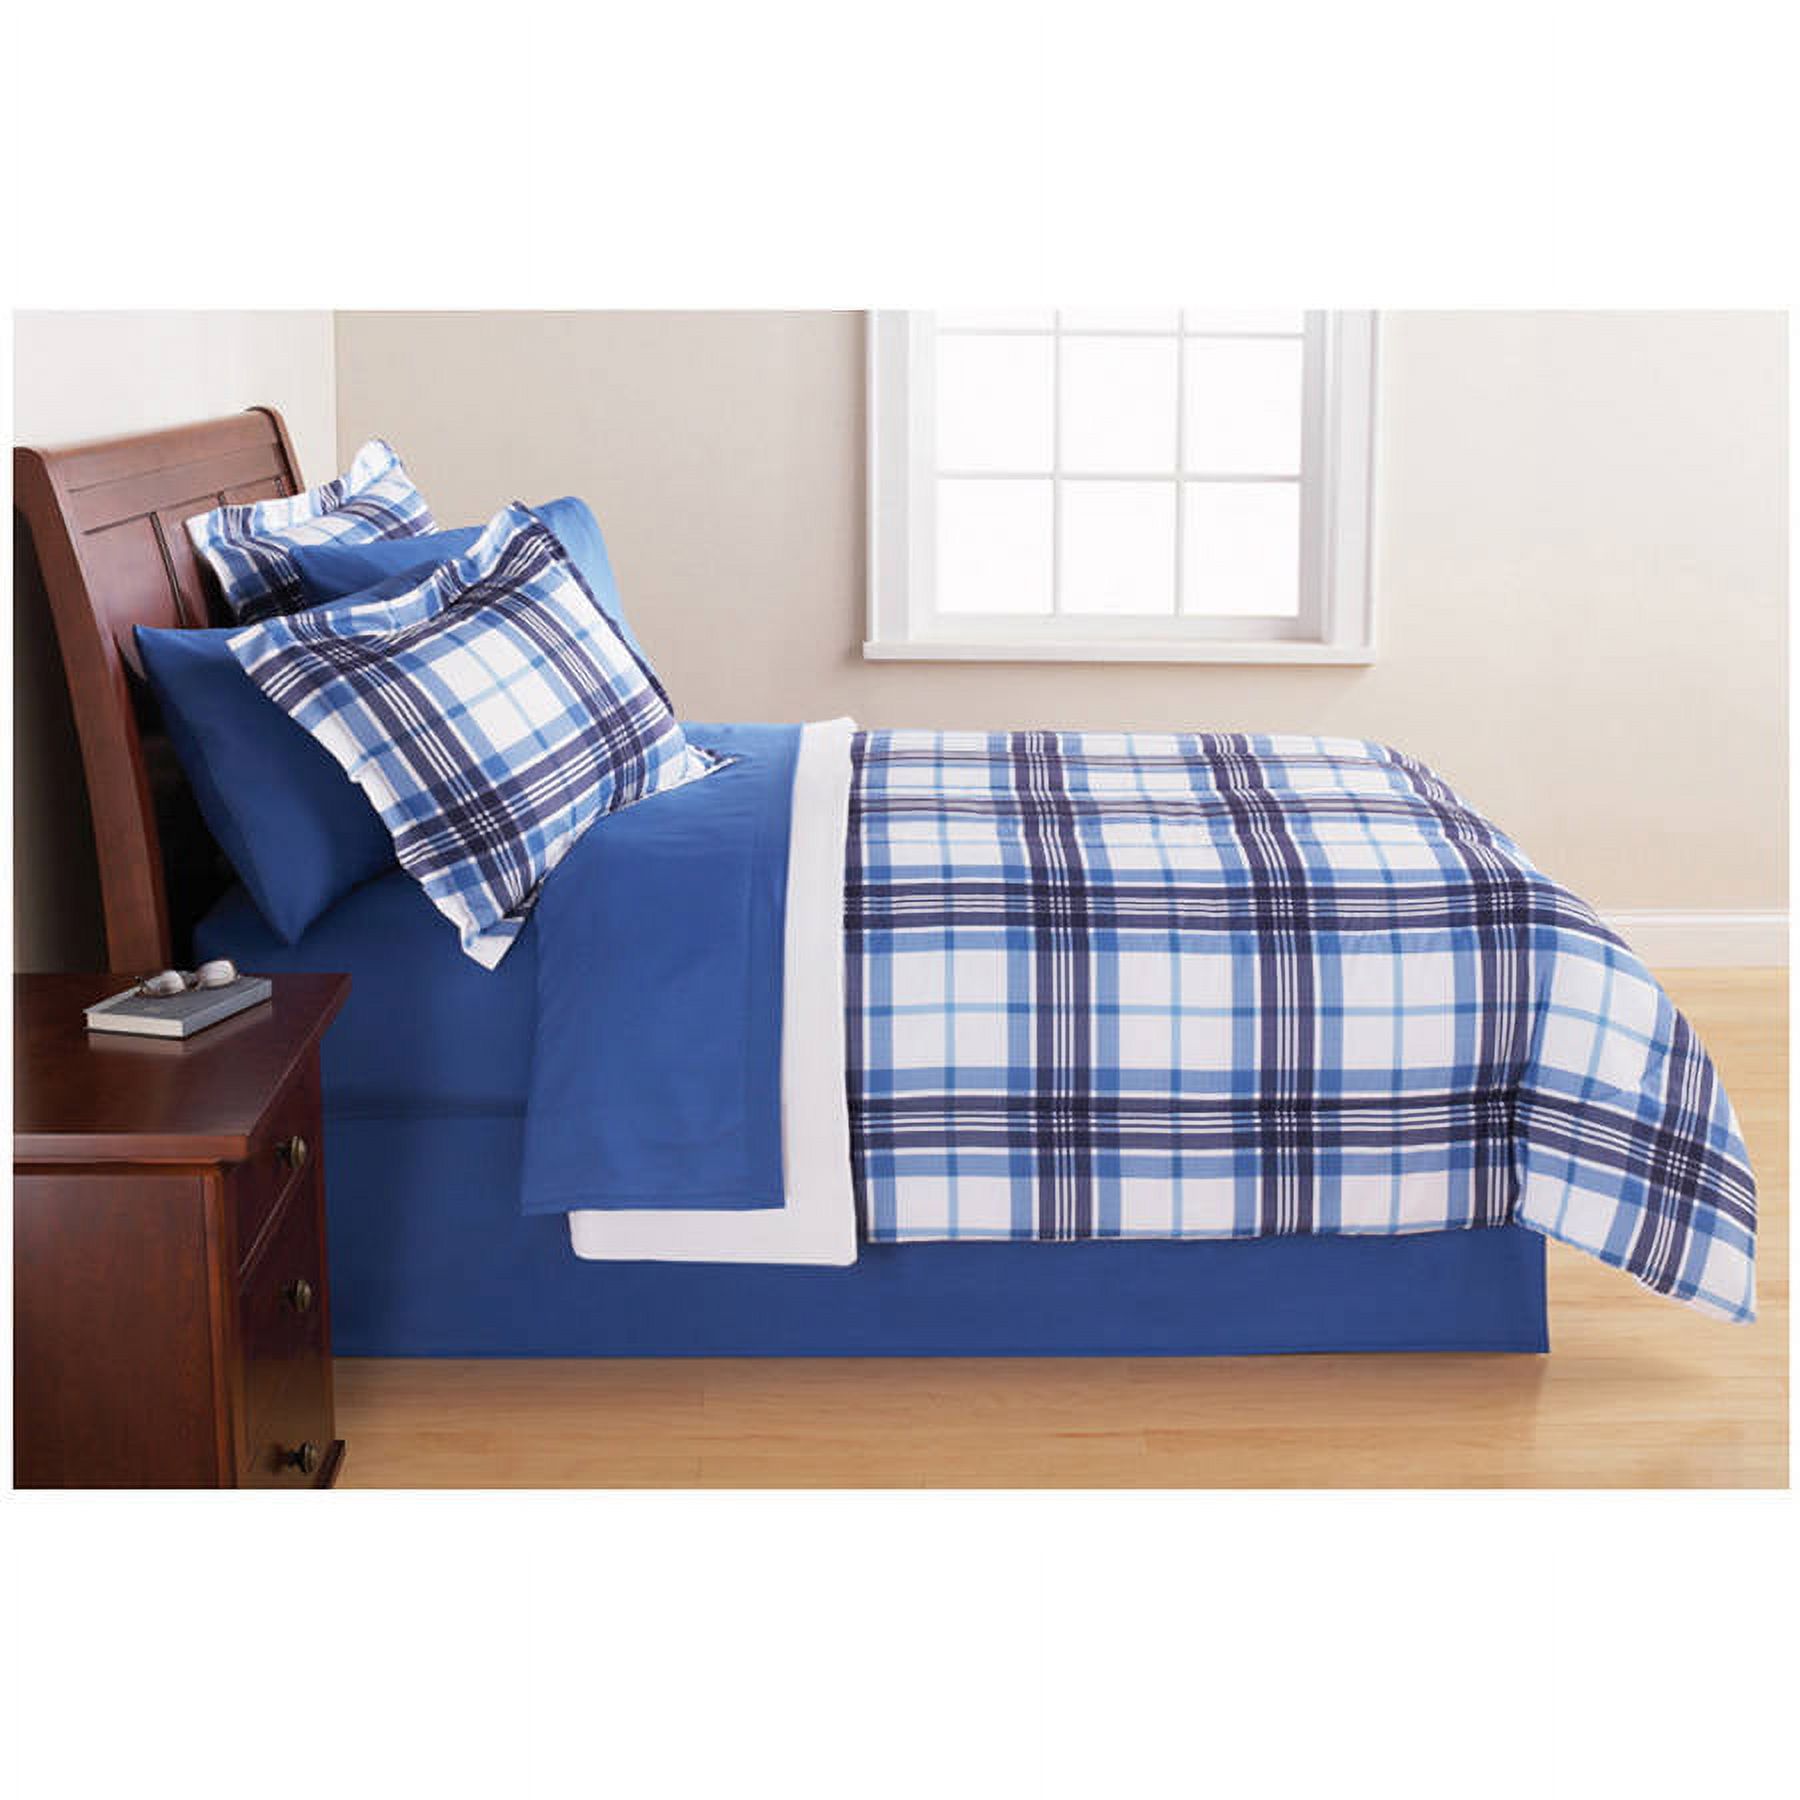 Mainstays Blue Plaid 6 Piece Bed in a Bag Comforter Set with Sheets, Twin - image 1 of 6